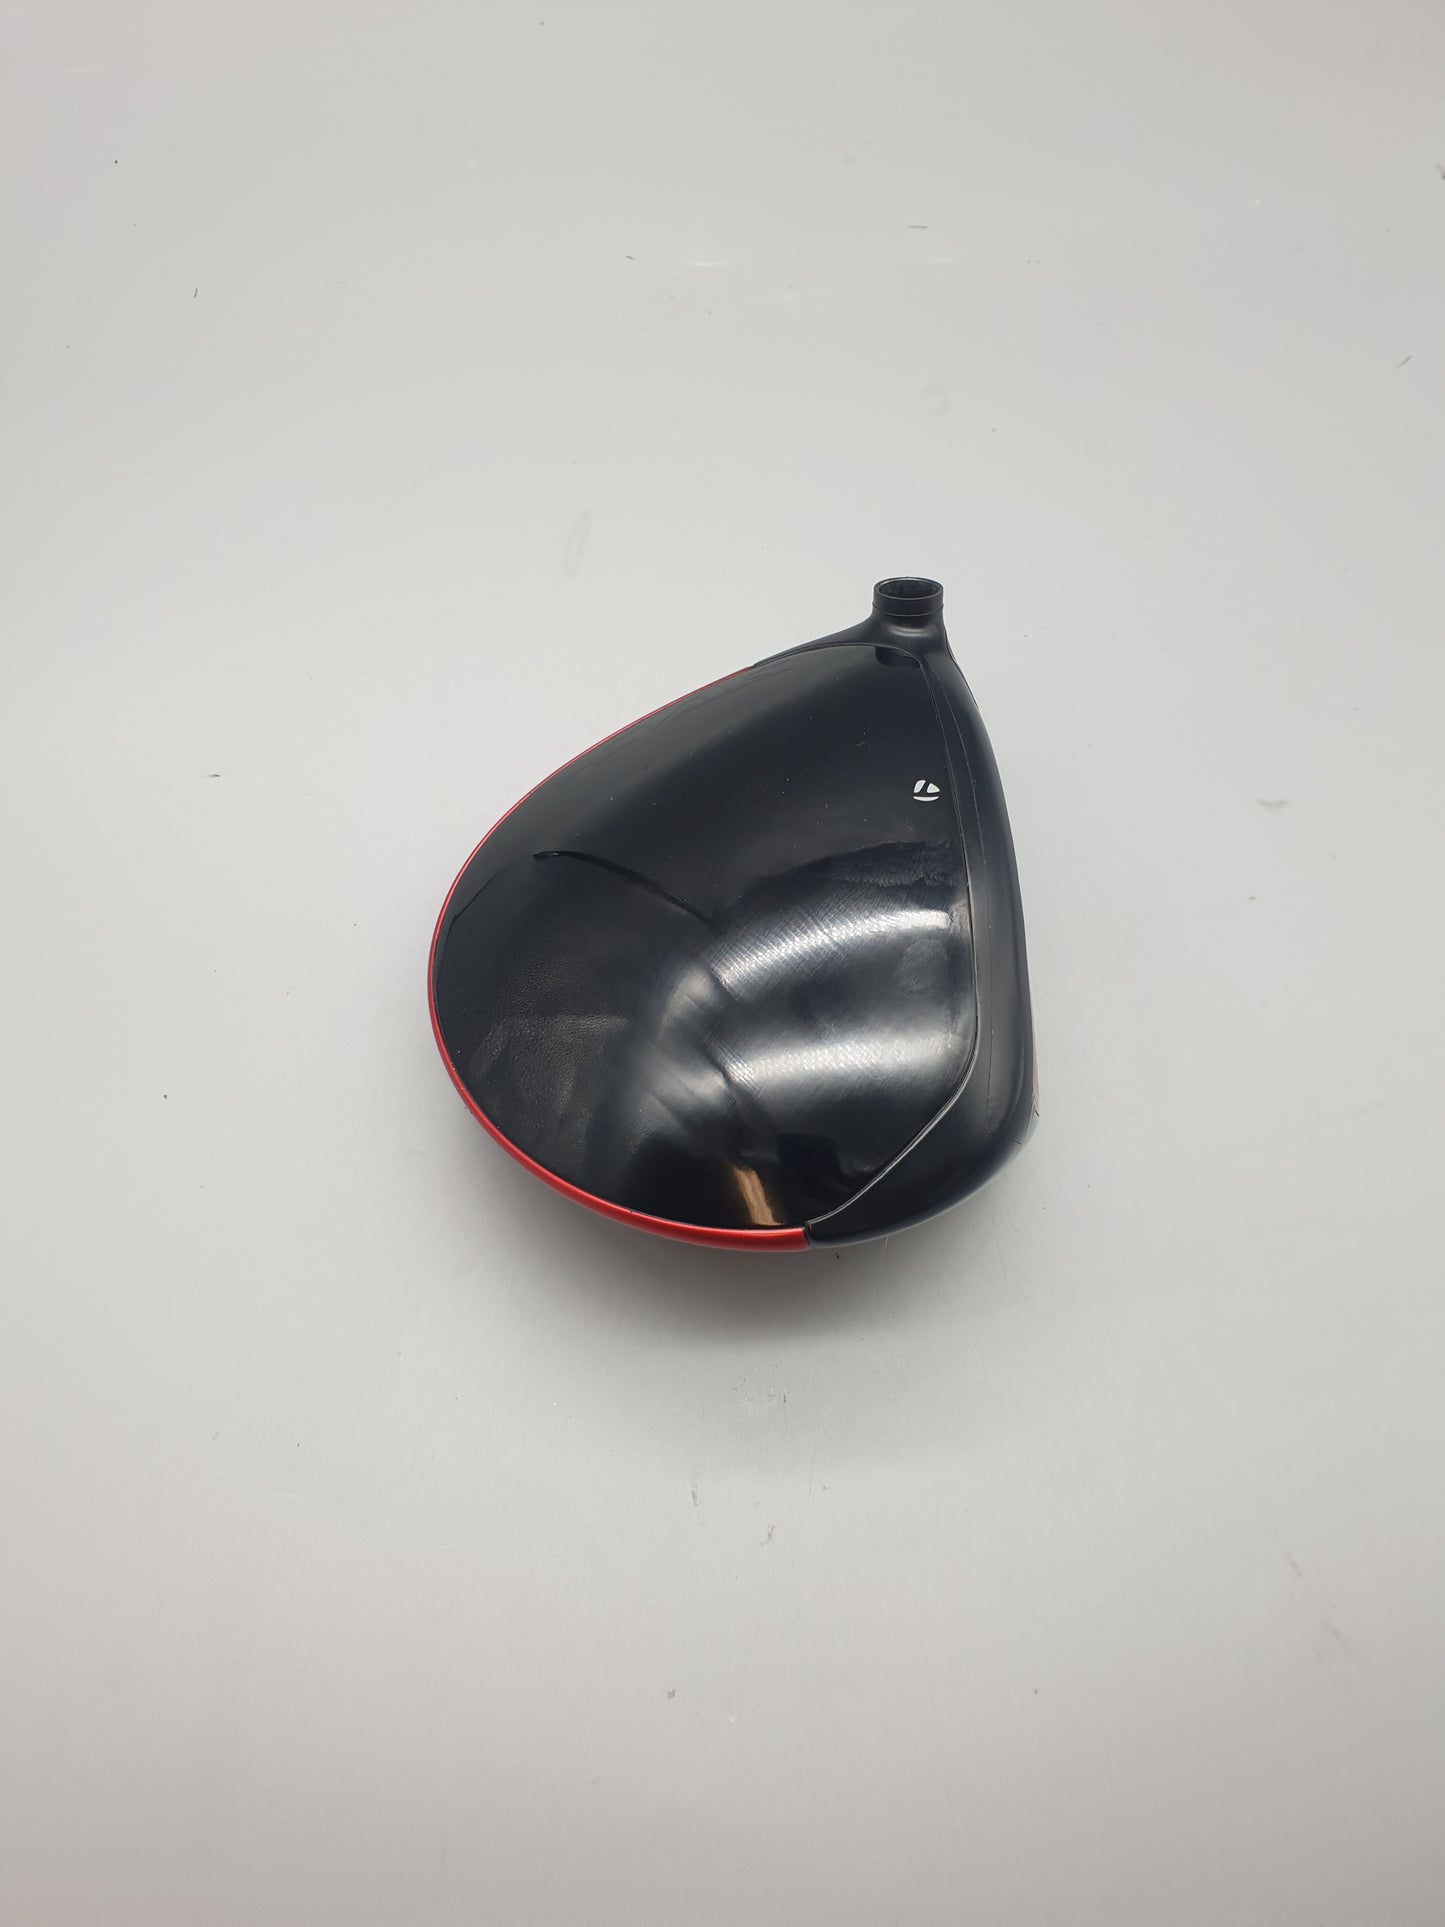 Taylormade Stealth2 HD 10.5 Driver Ventus Red 50g Regular Right Hand - Used